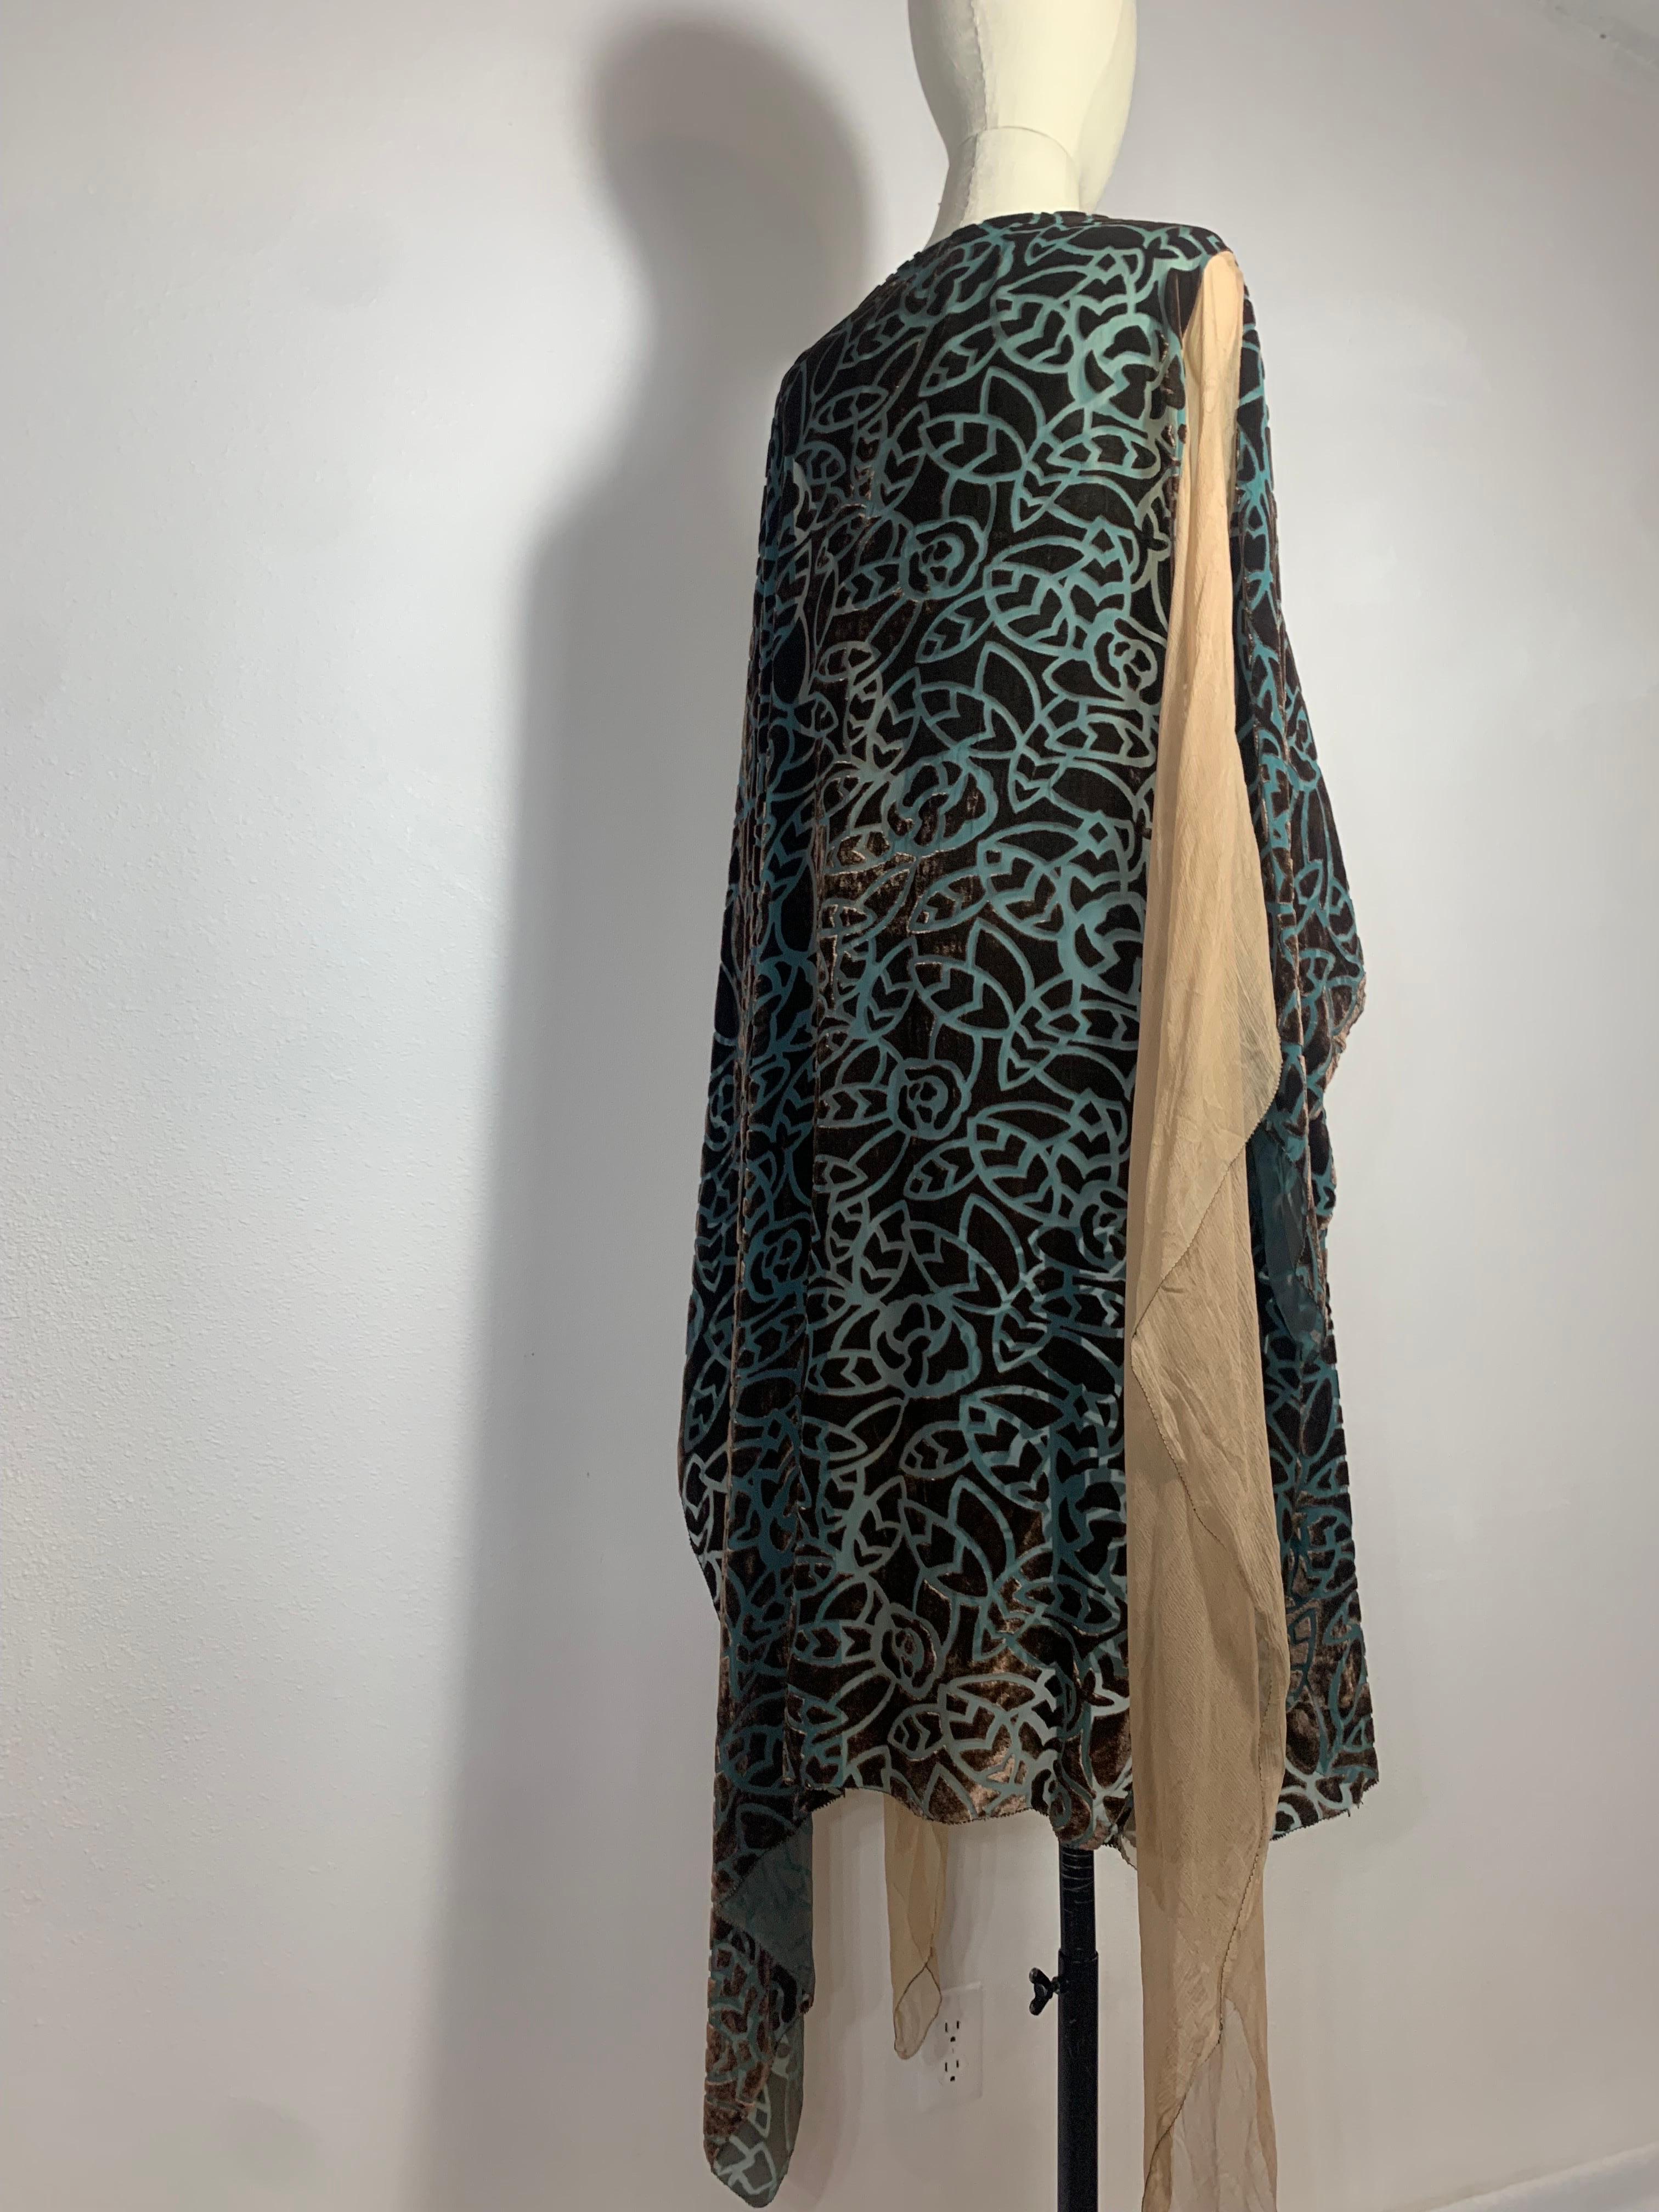 1920s Patina Green & Taupe Devore Velvet Art Deco Tunic w Stylized Leaf Pattern For Sale 9